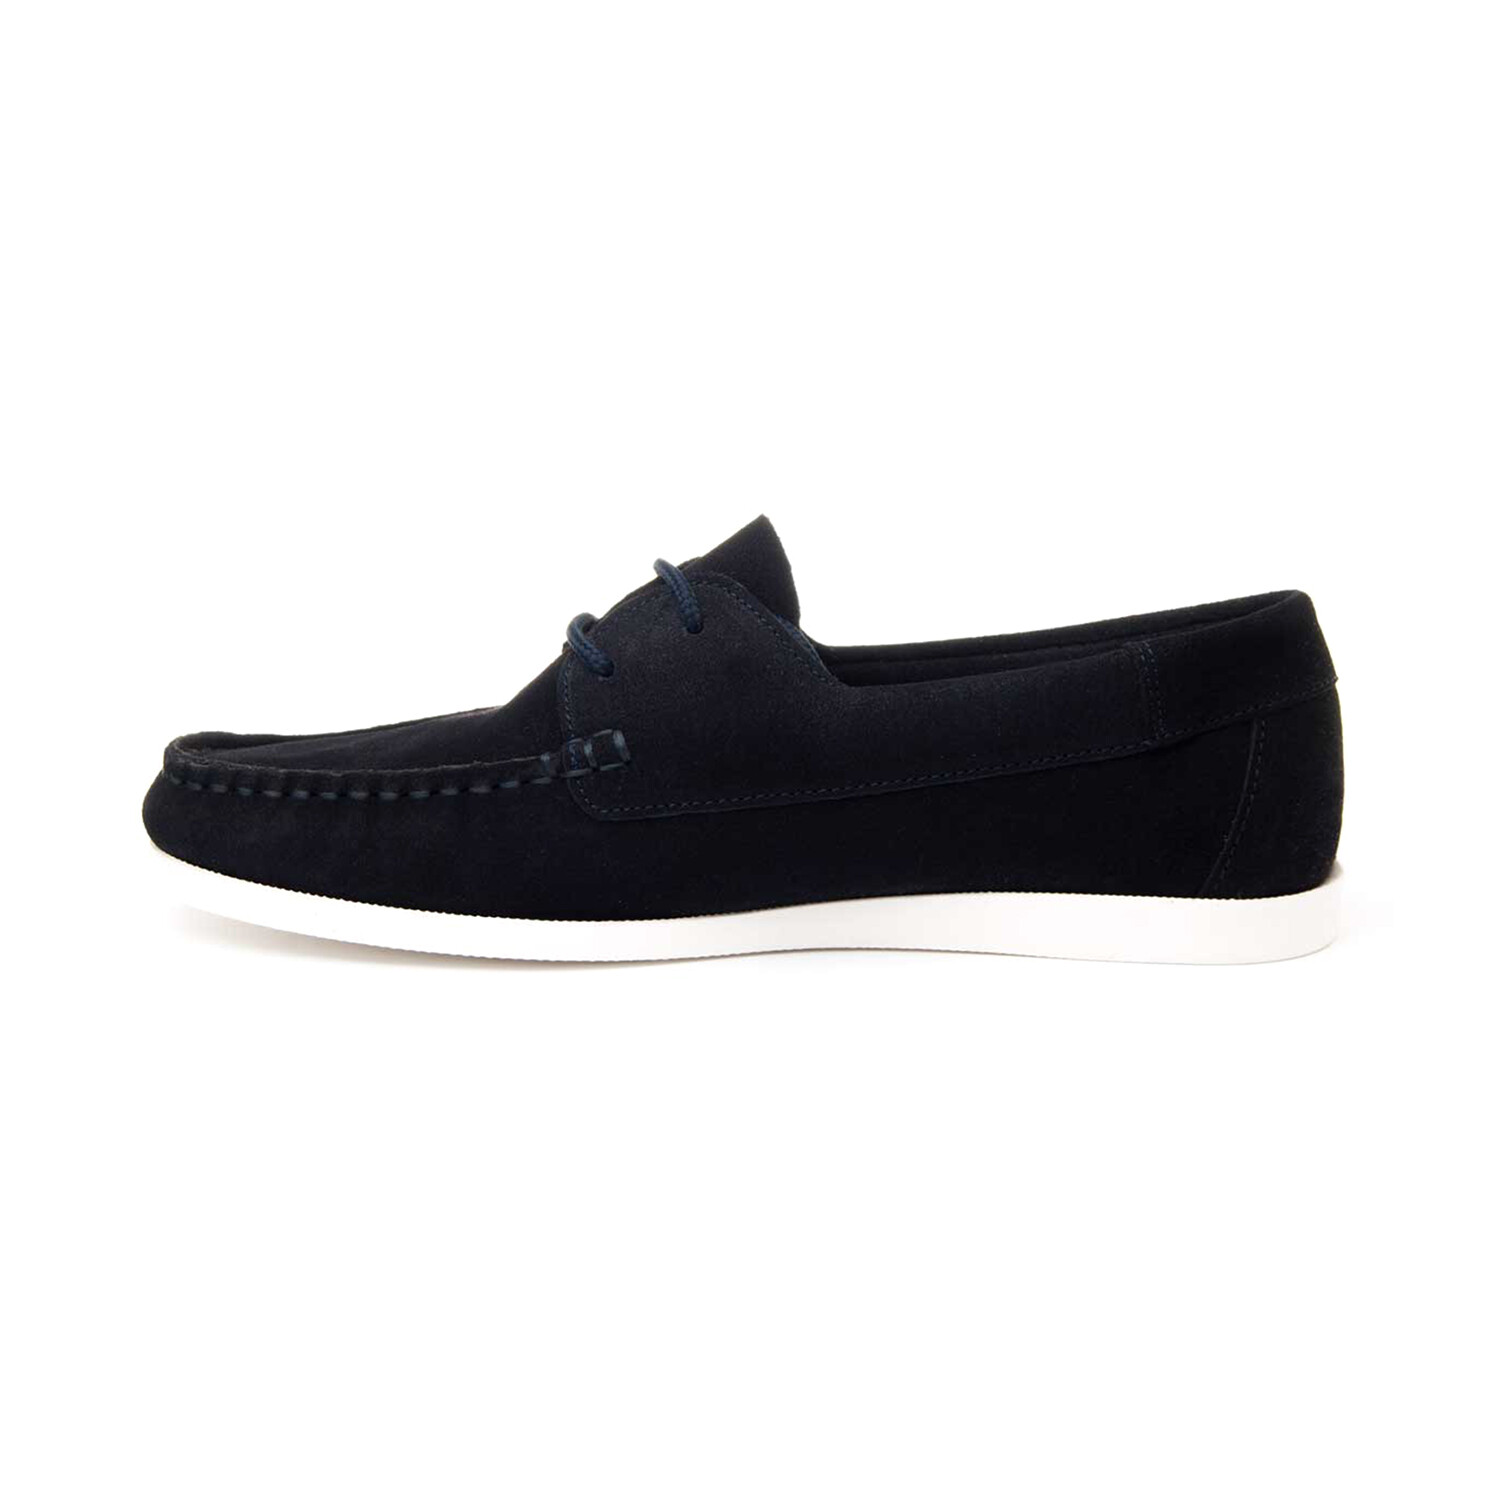 Quebramar Nautical Shoe // Navy (Euro Size 44) - Diluis - Touch of Modern